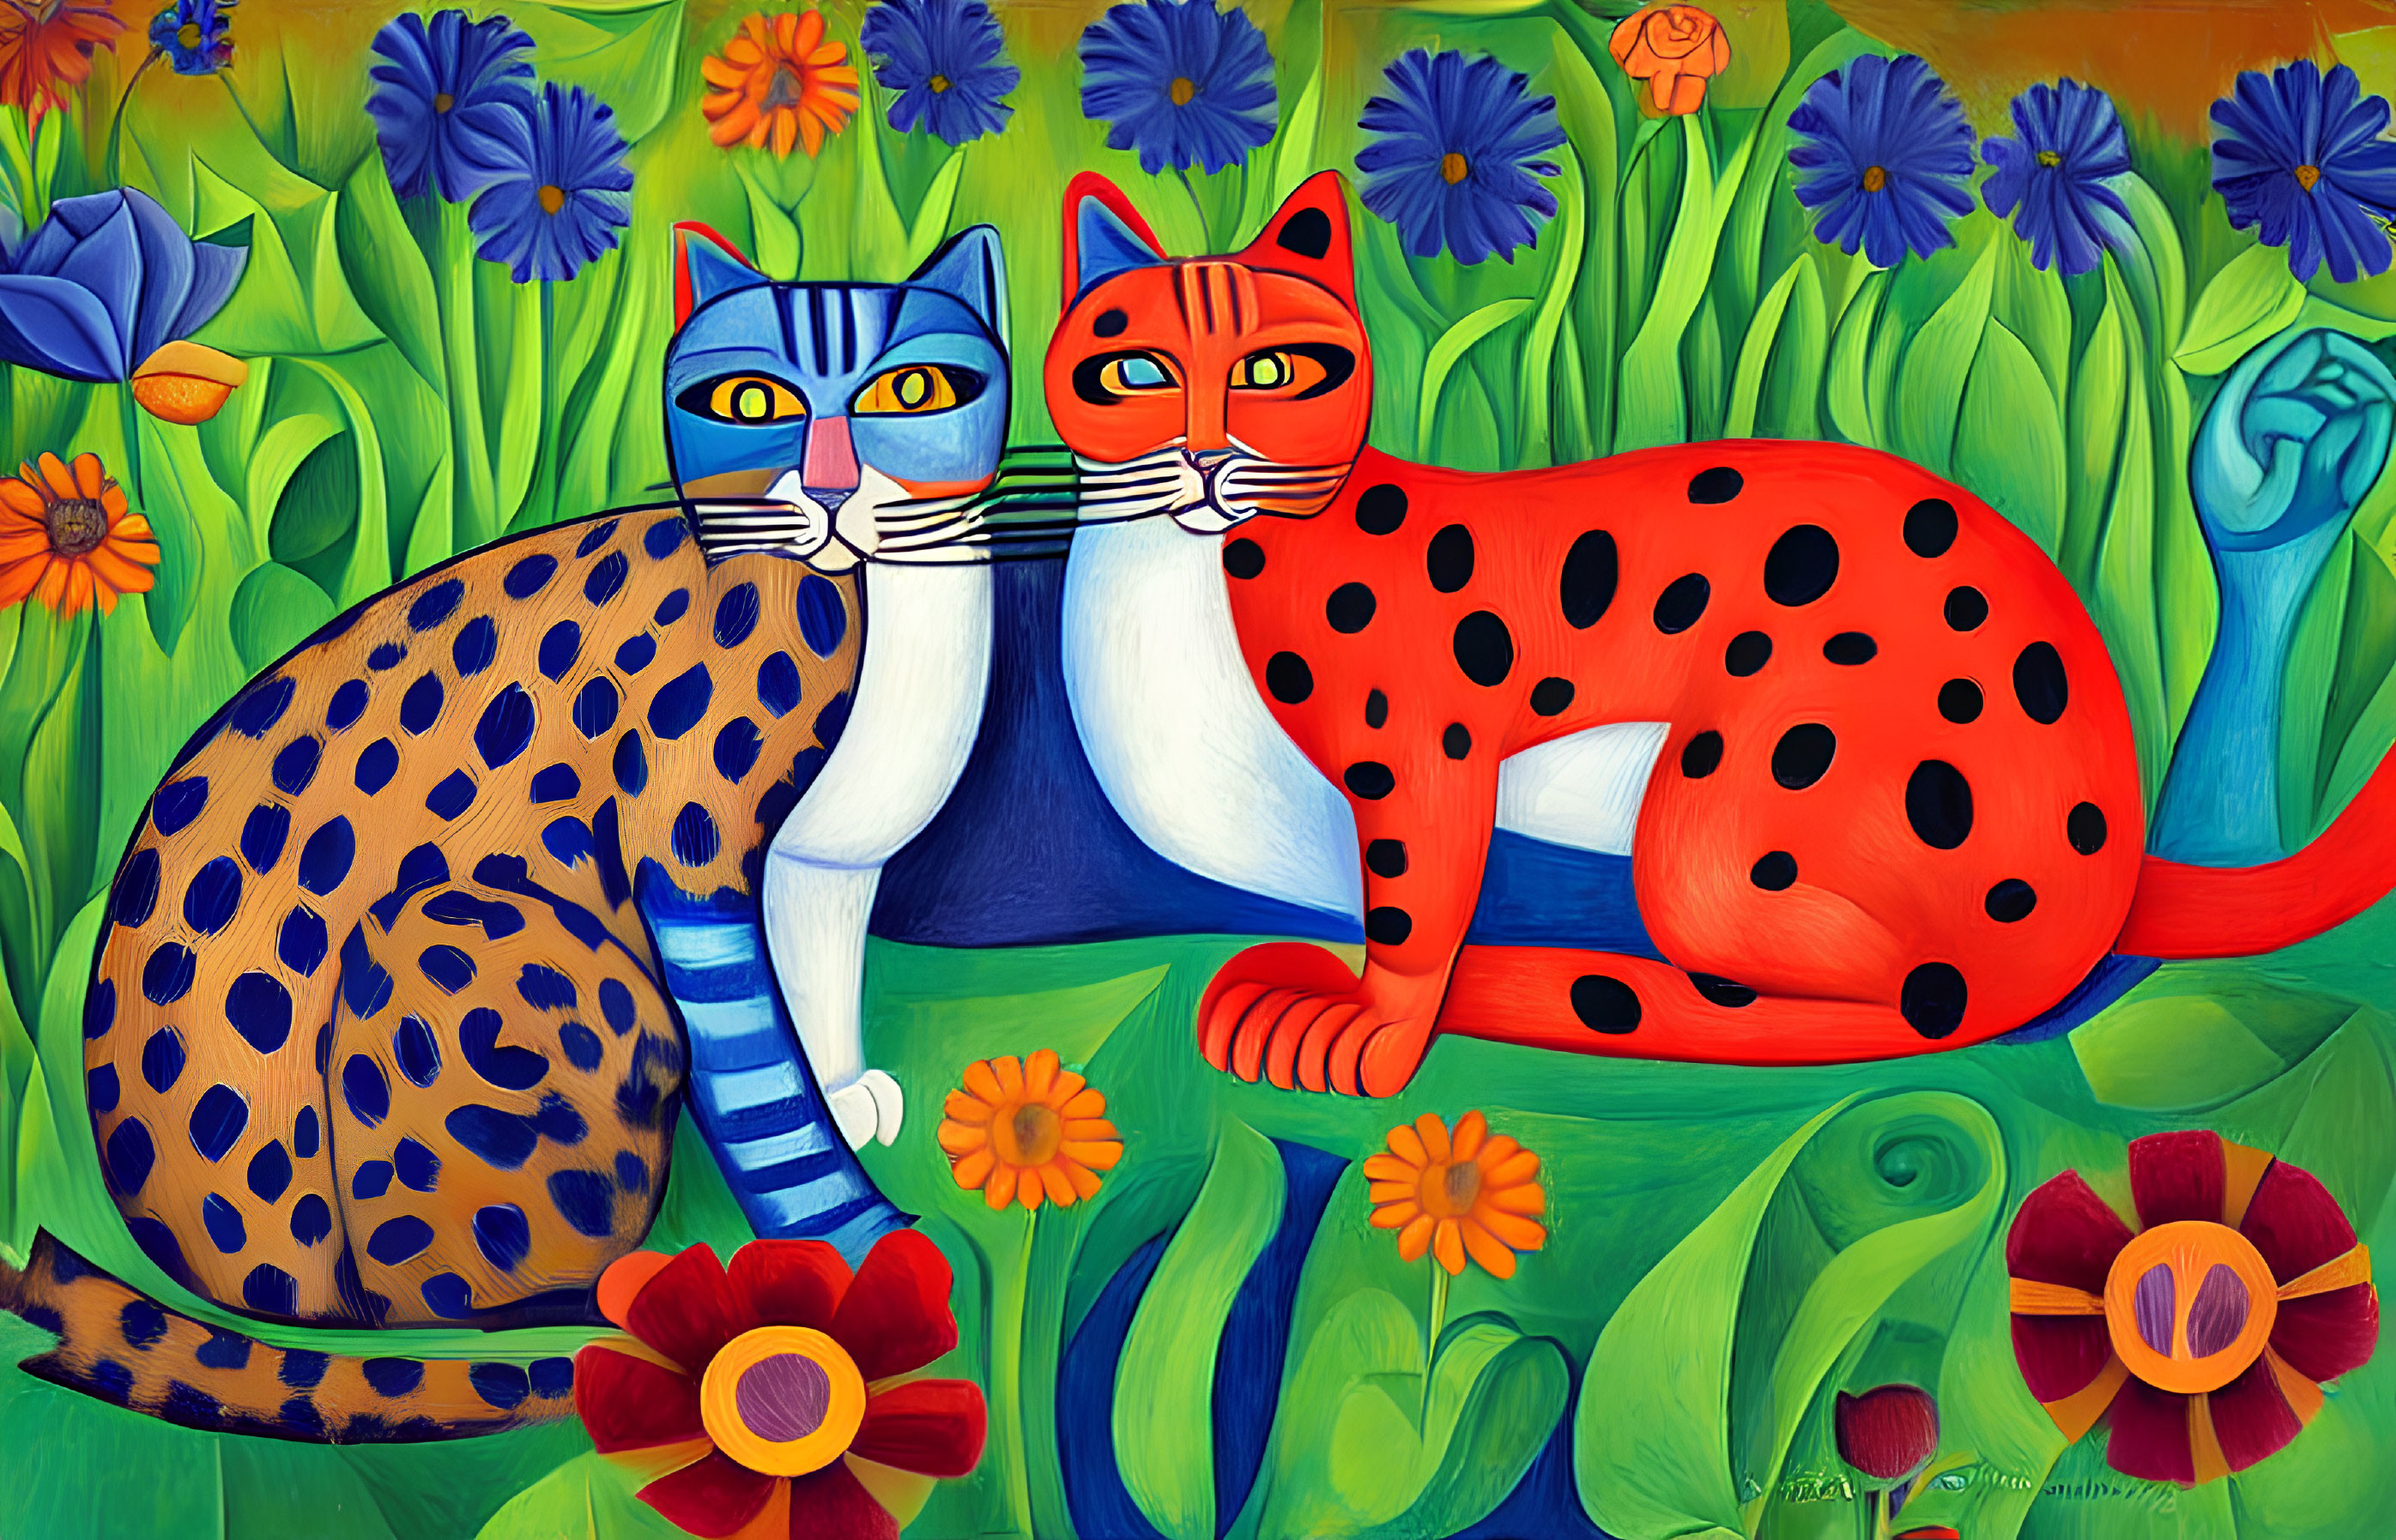 Stylized spotted and striped cats in colorful garden with vibrant flowers